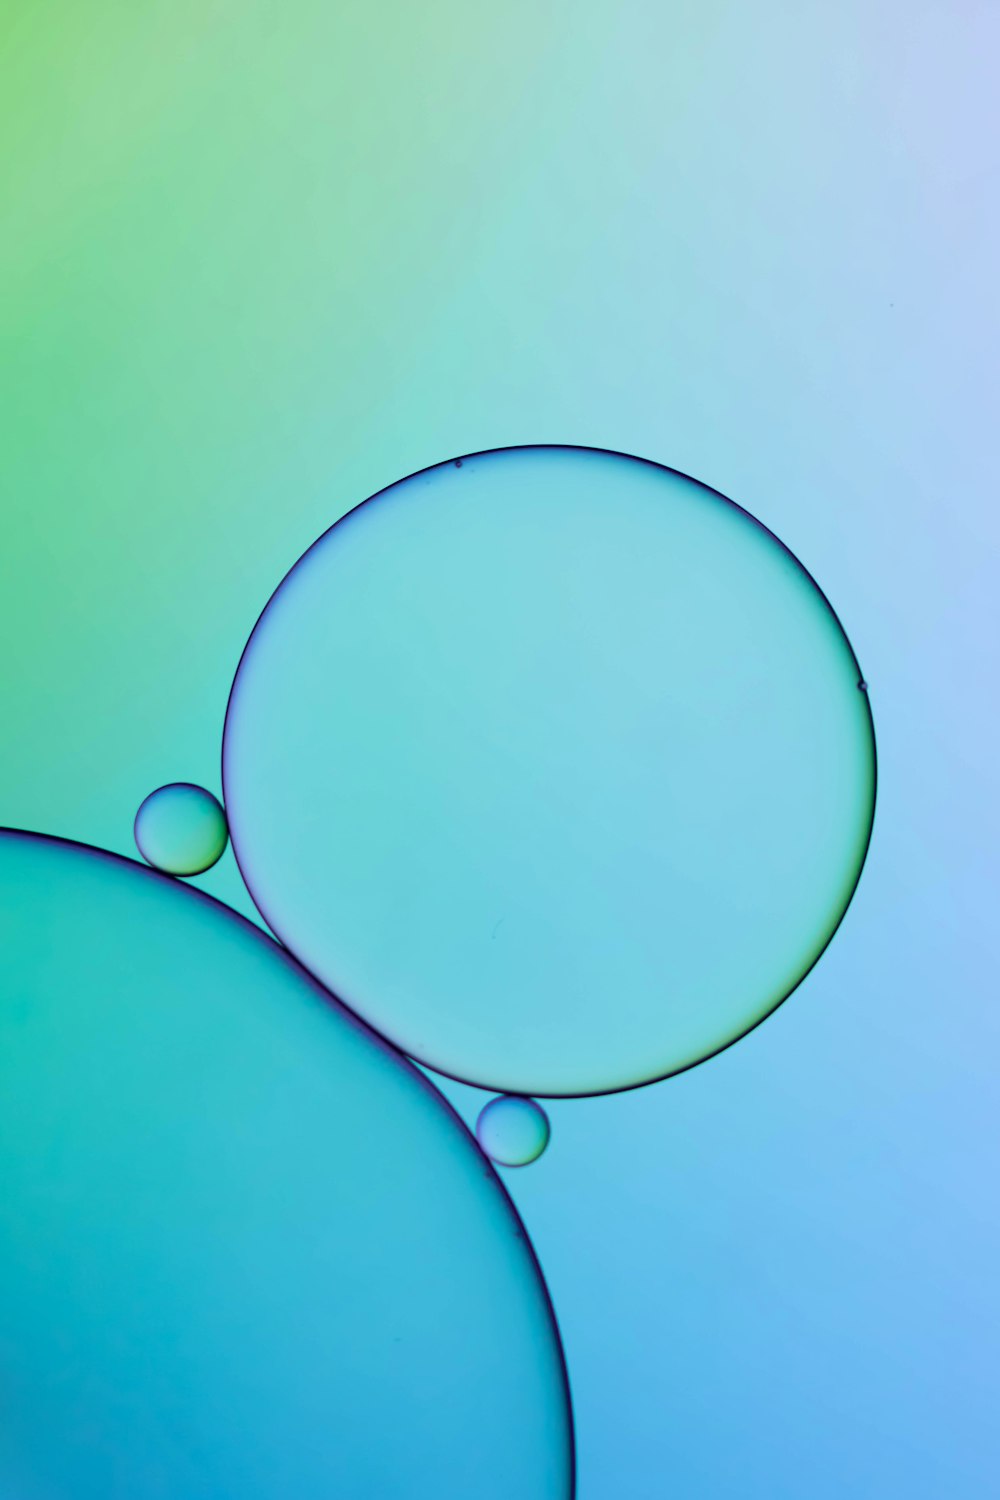 a close up of two bubbles on a blue and green background